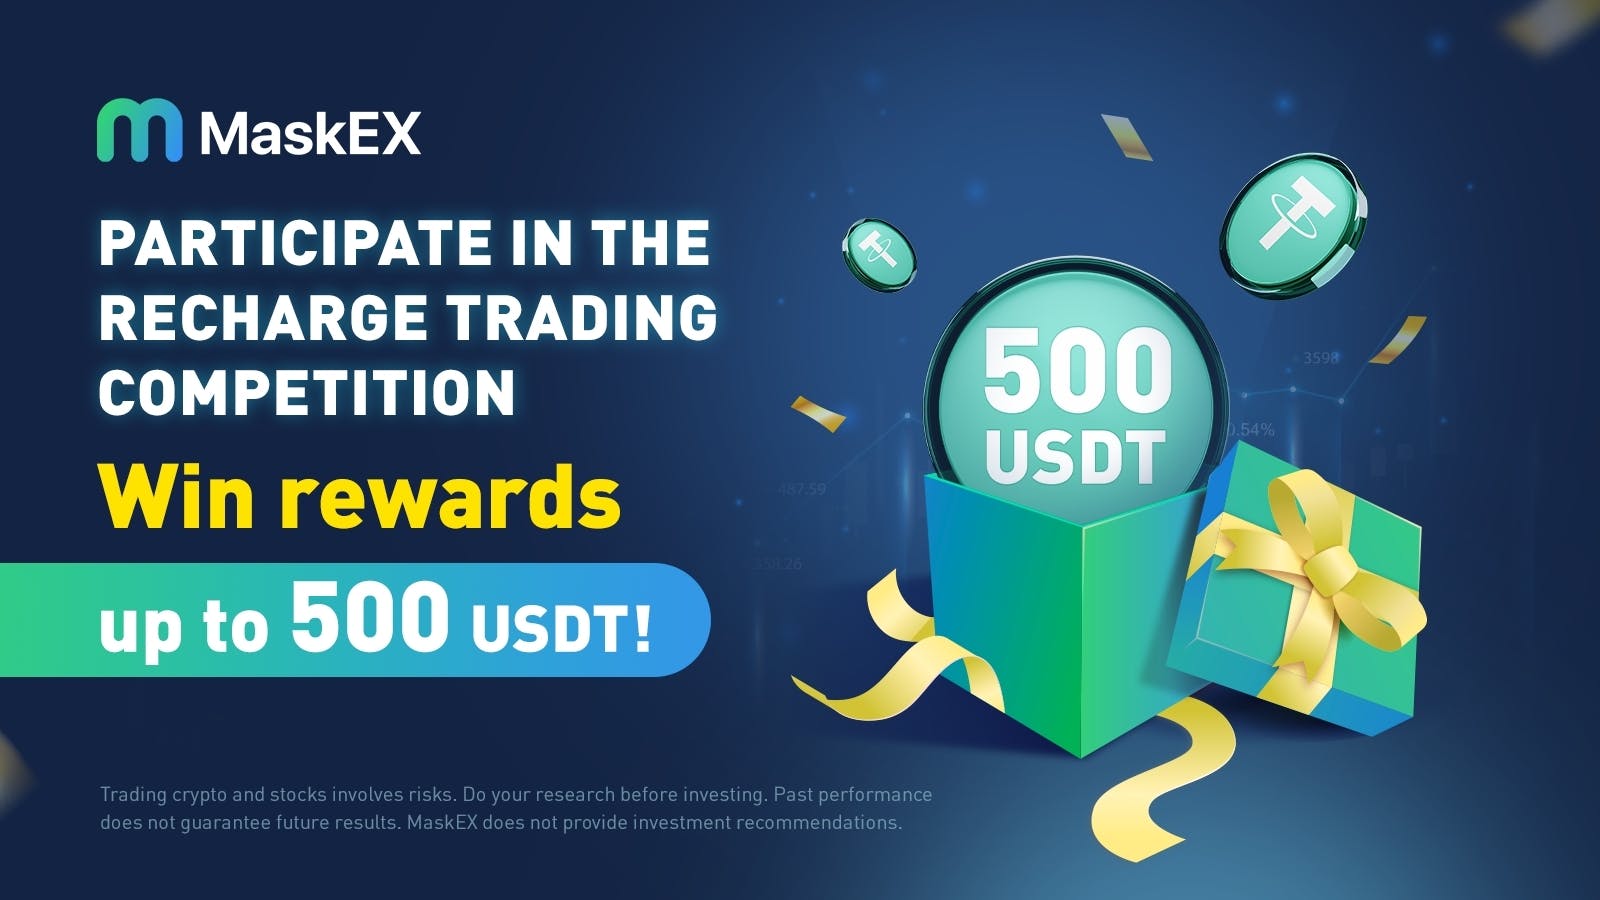 MaskEX Recharge Trading Ranking Competition!